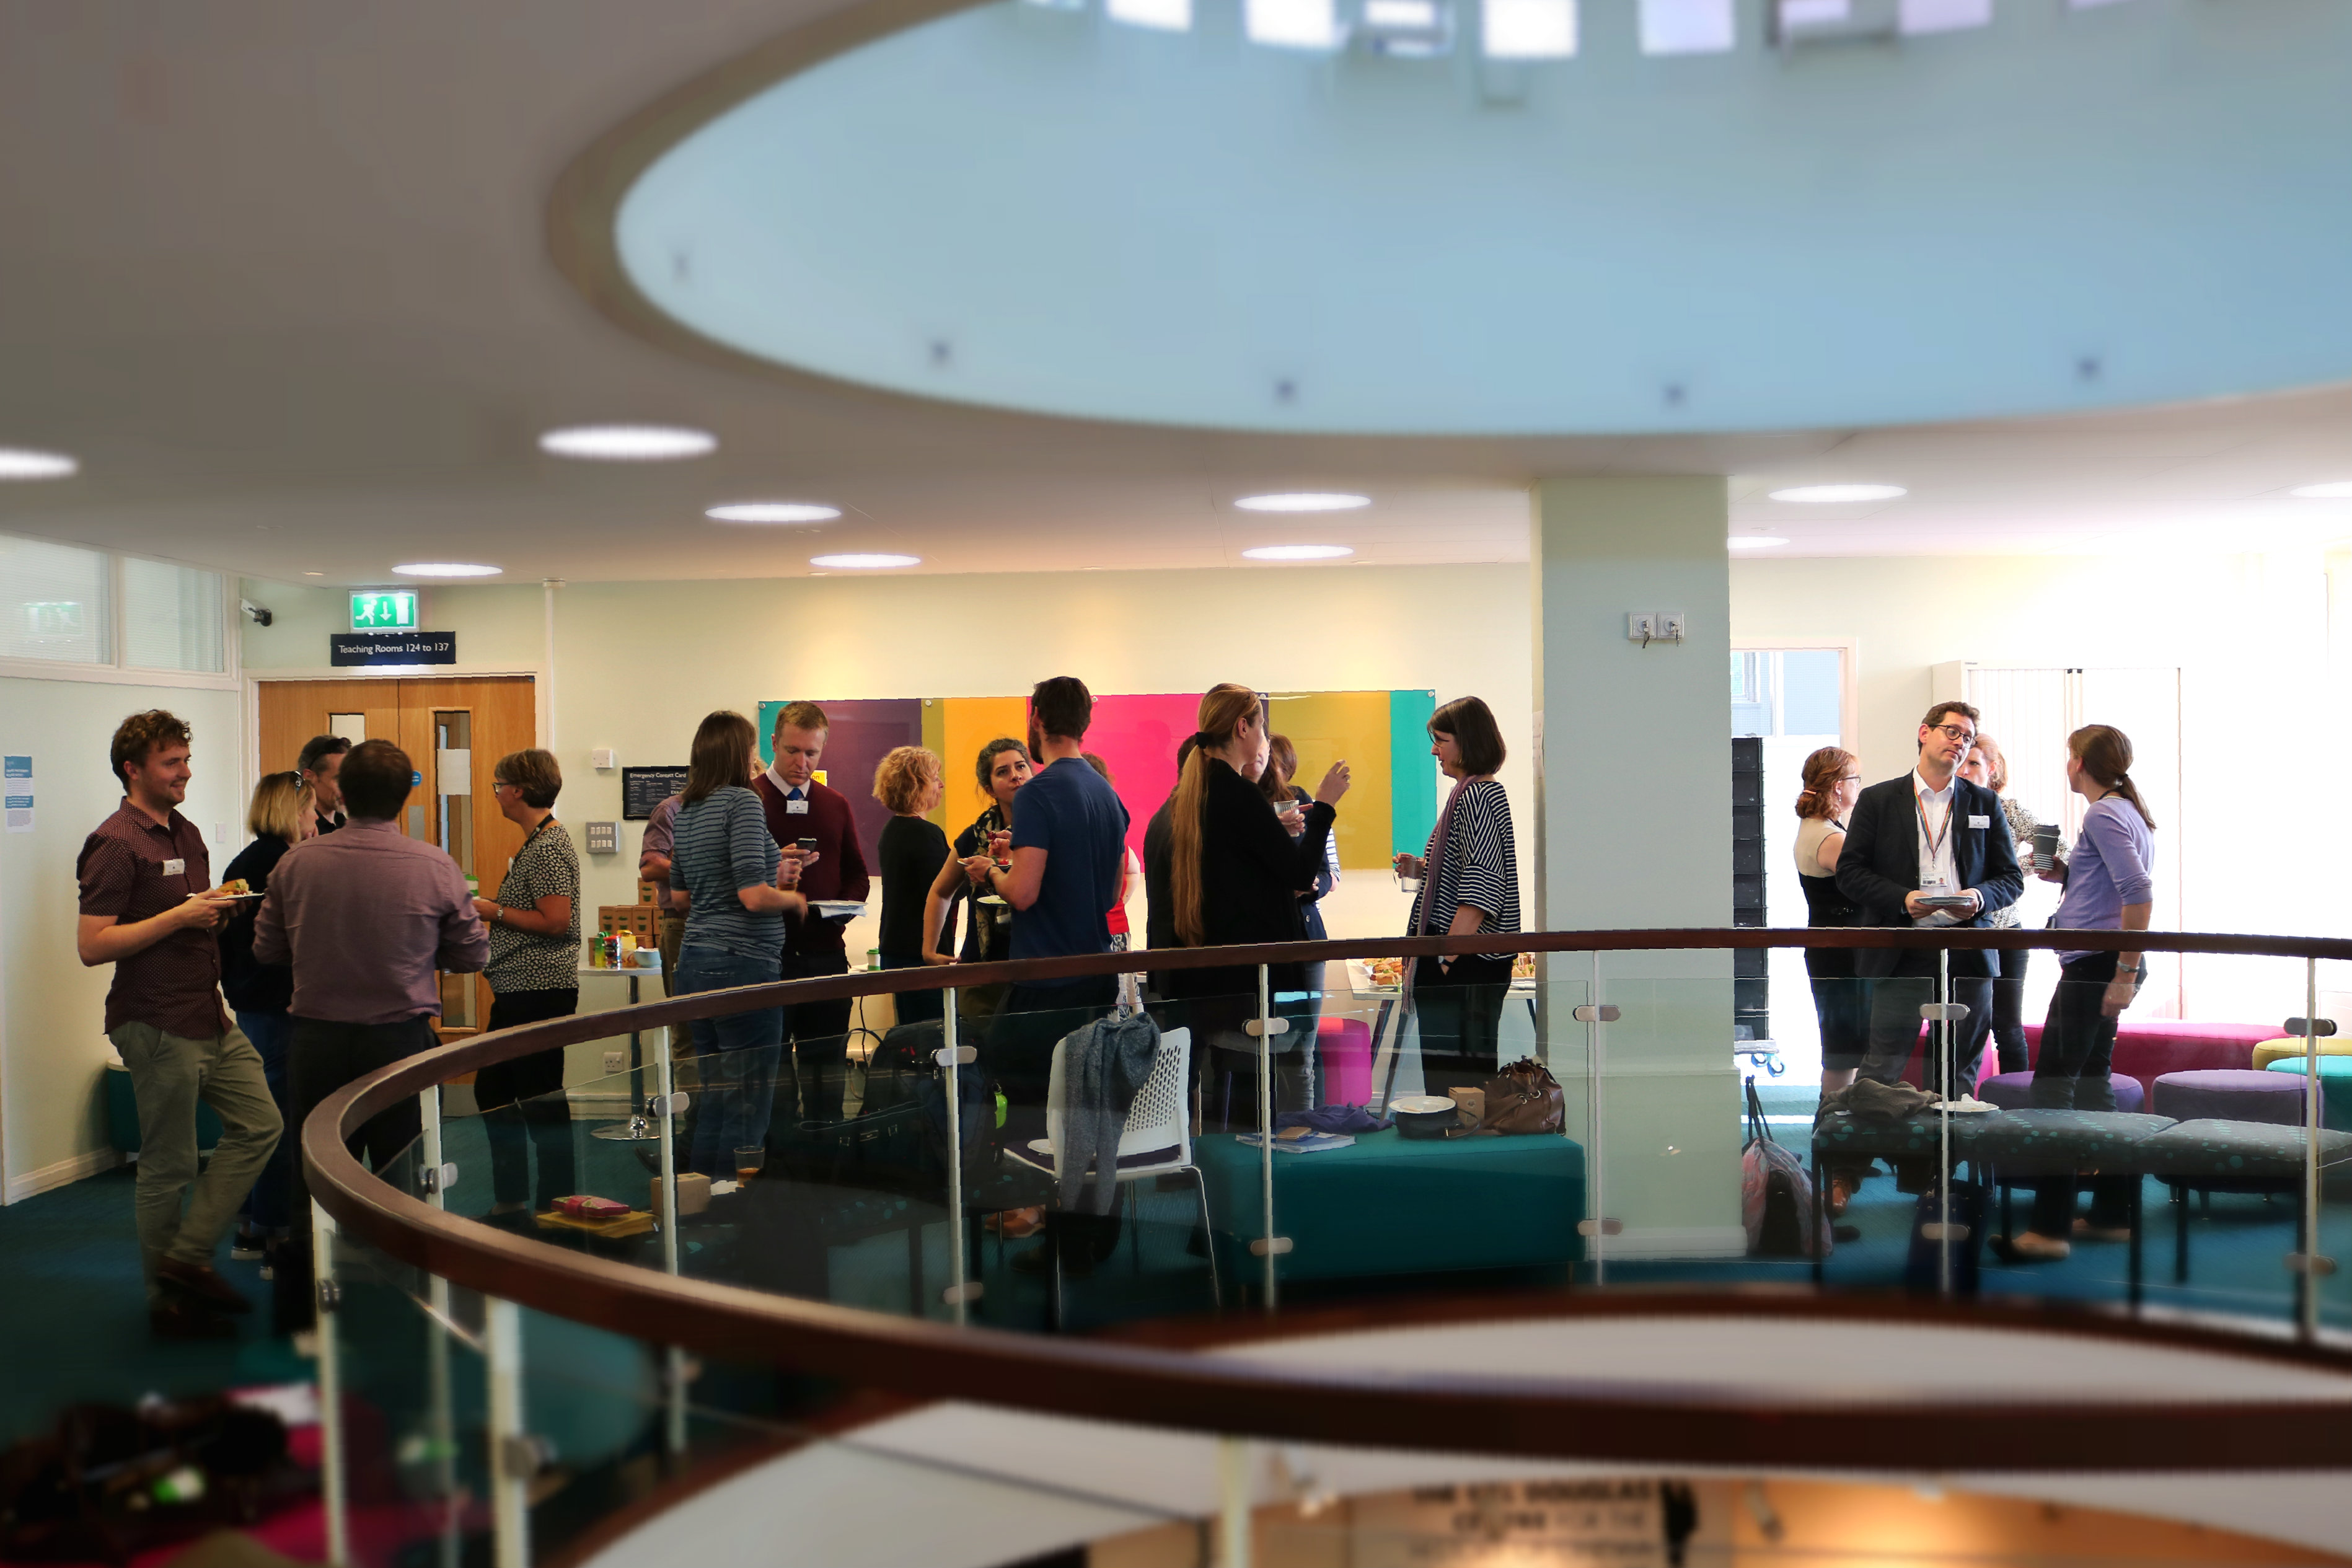 View of guests at the Education Incubator Propeller Event on 10Oct18, held in the Old Library first floor balcony space